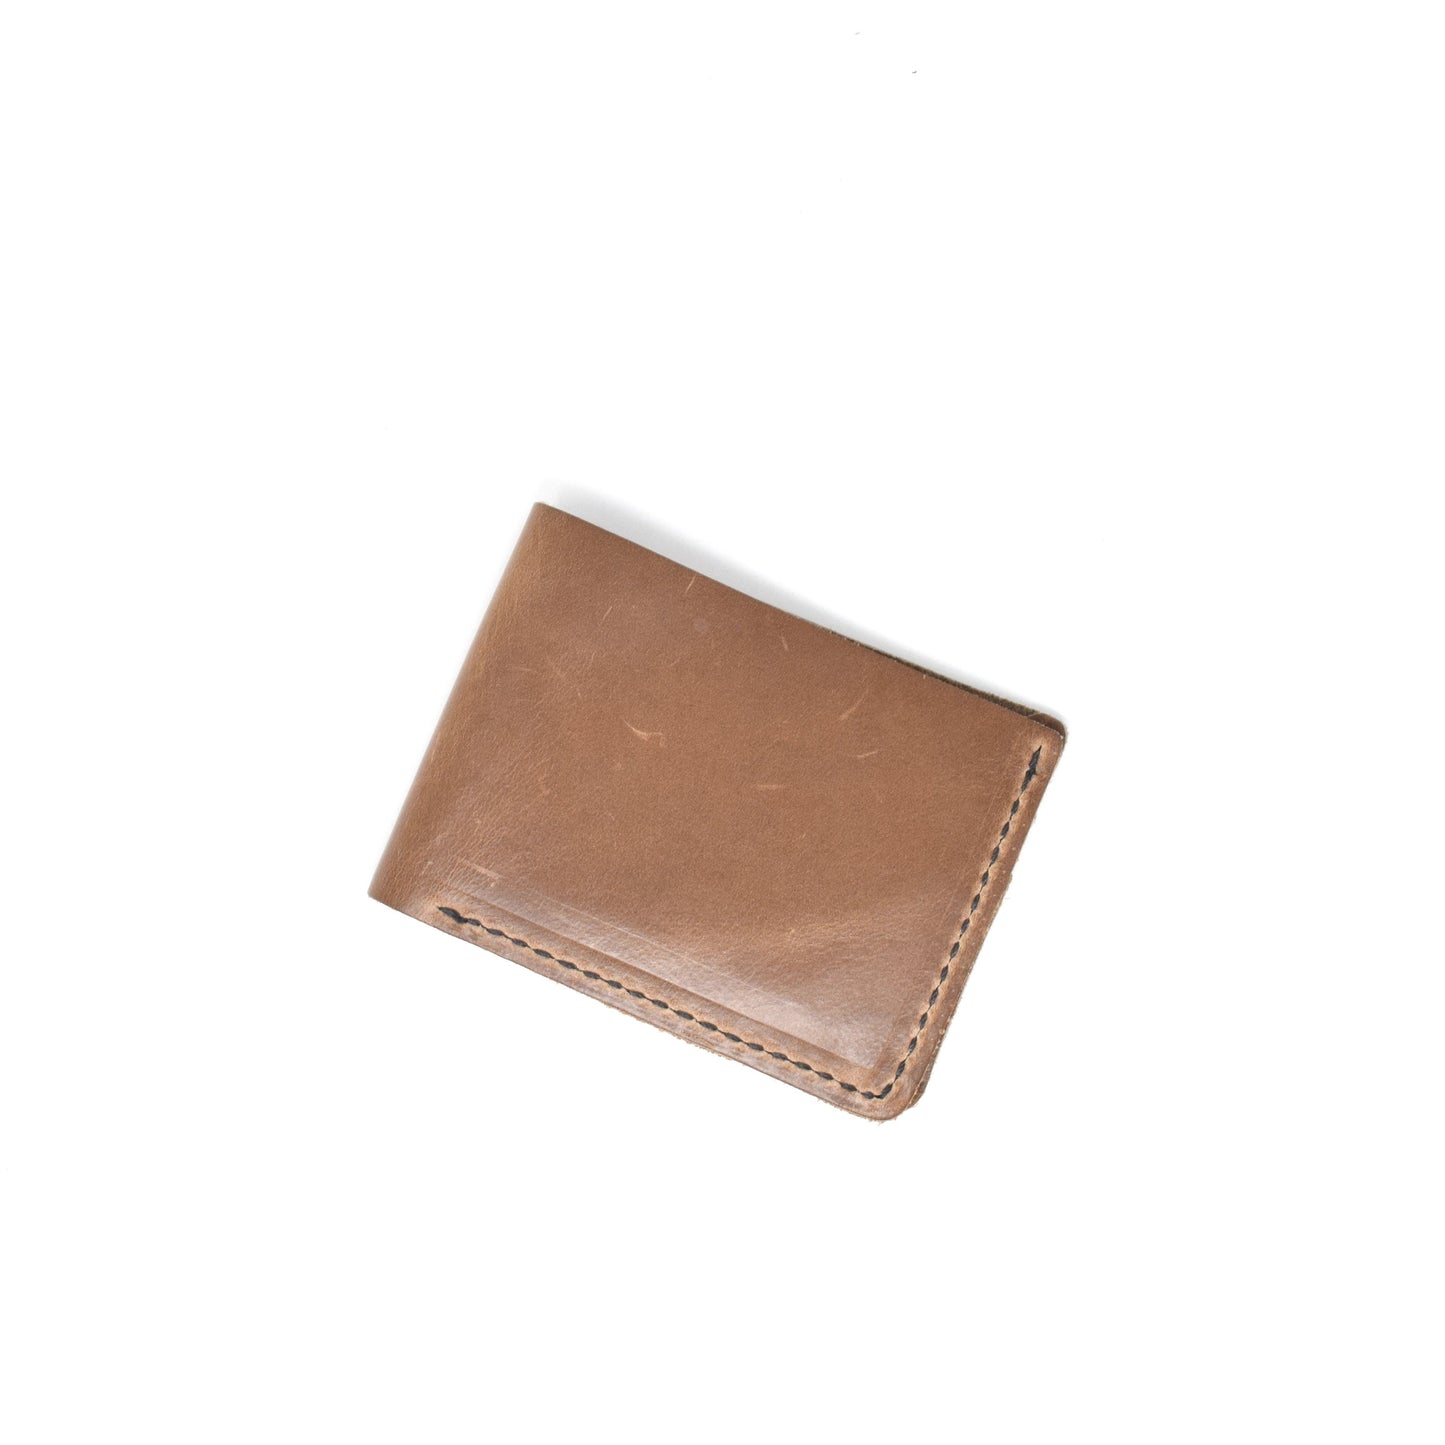 The Whiskey Bifold Wallet